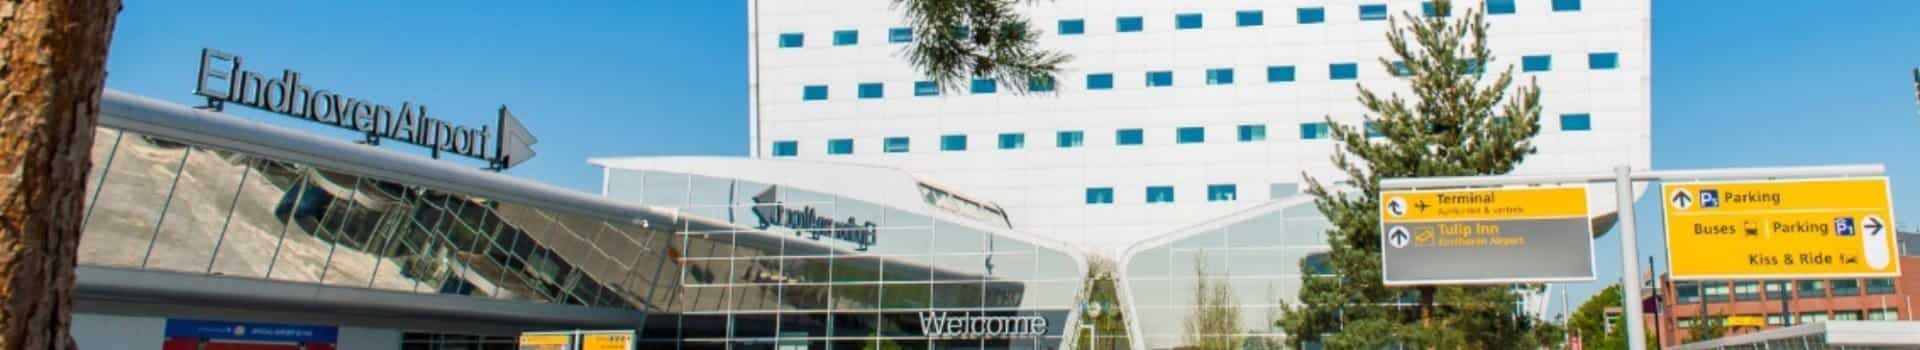 Hotels Eindhoven Airport 